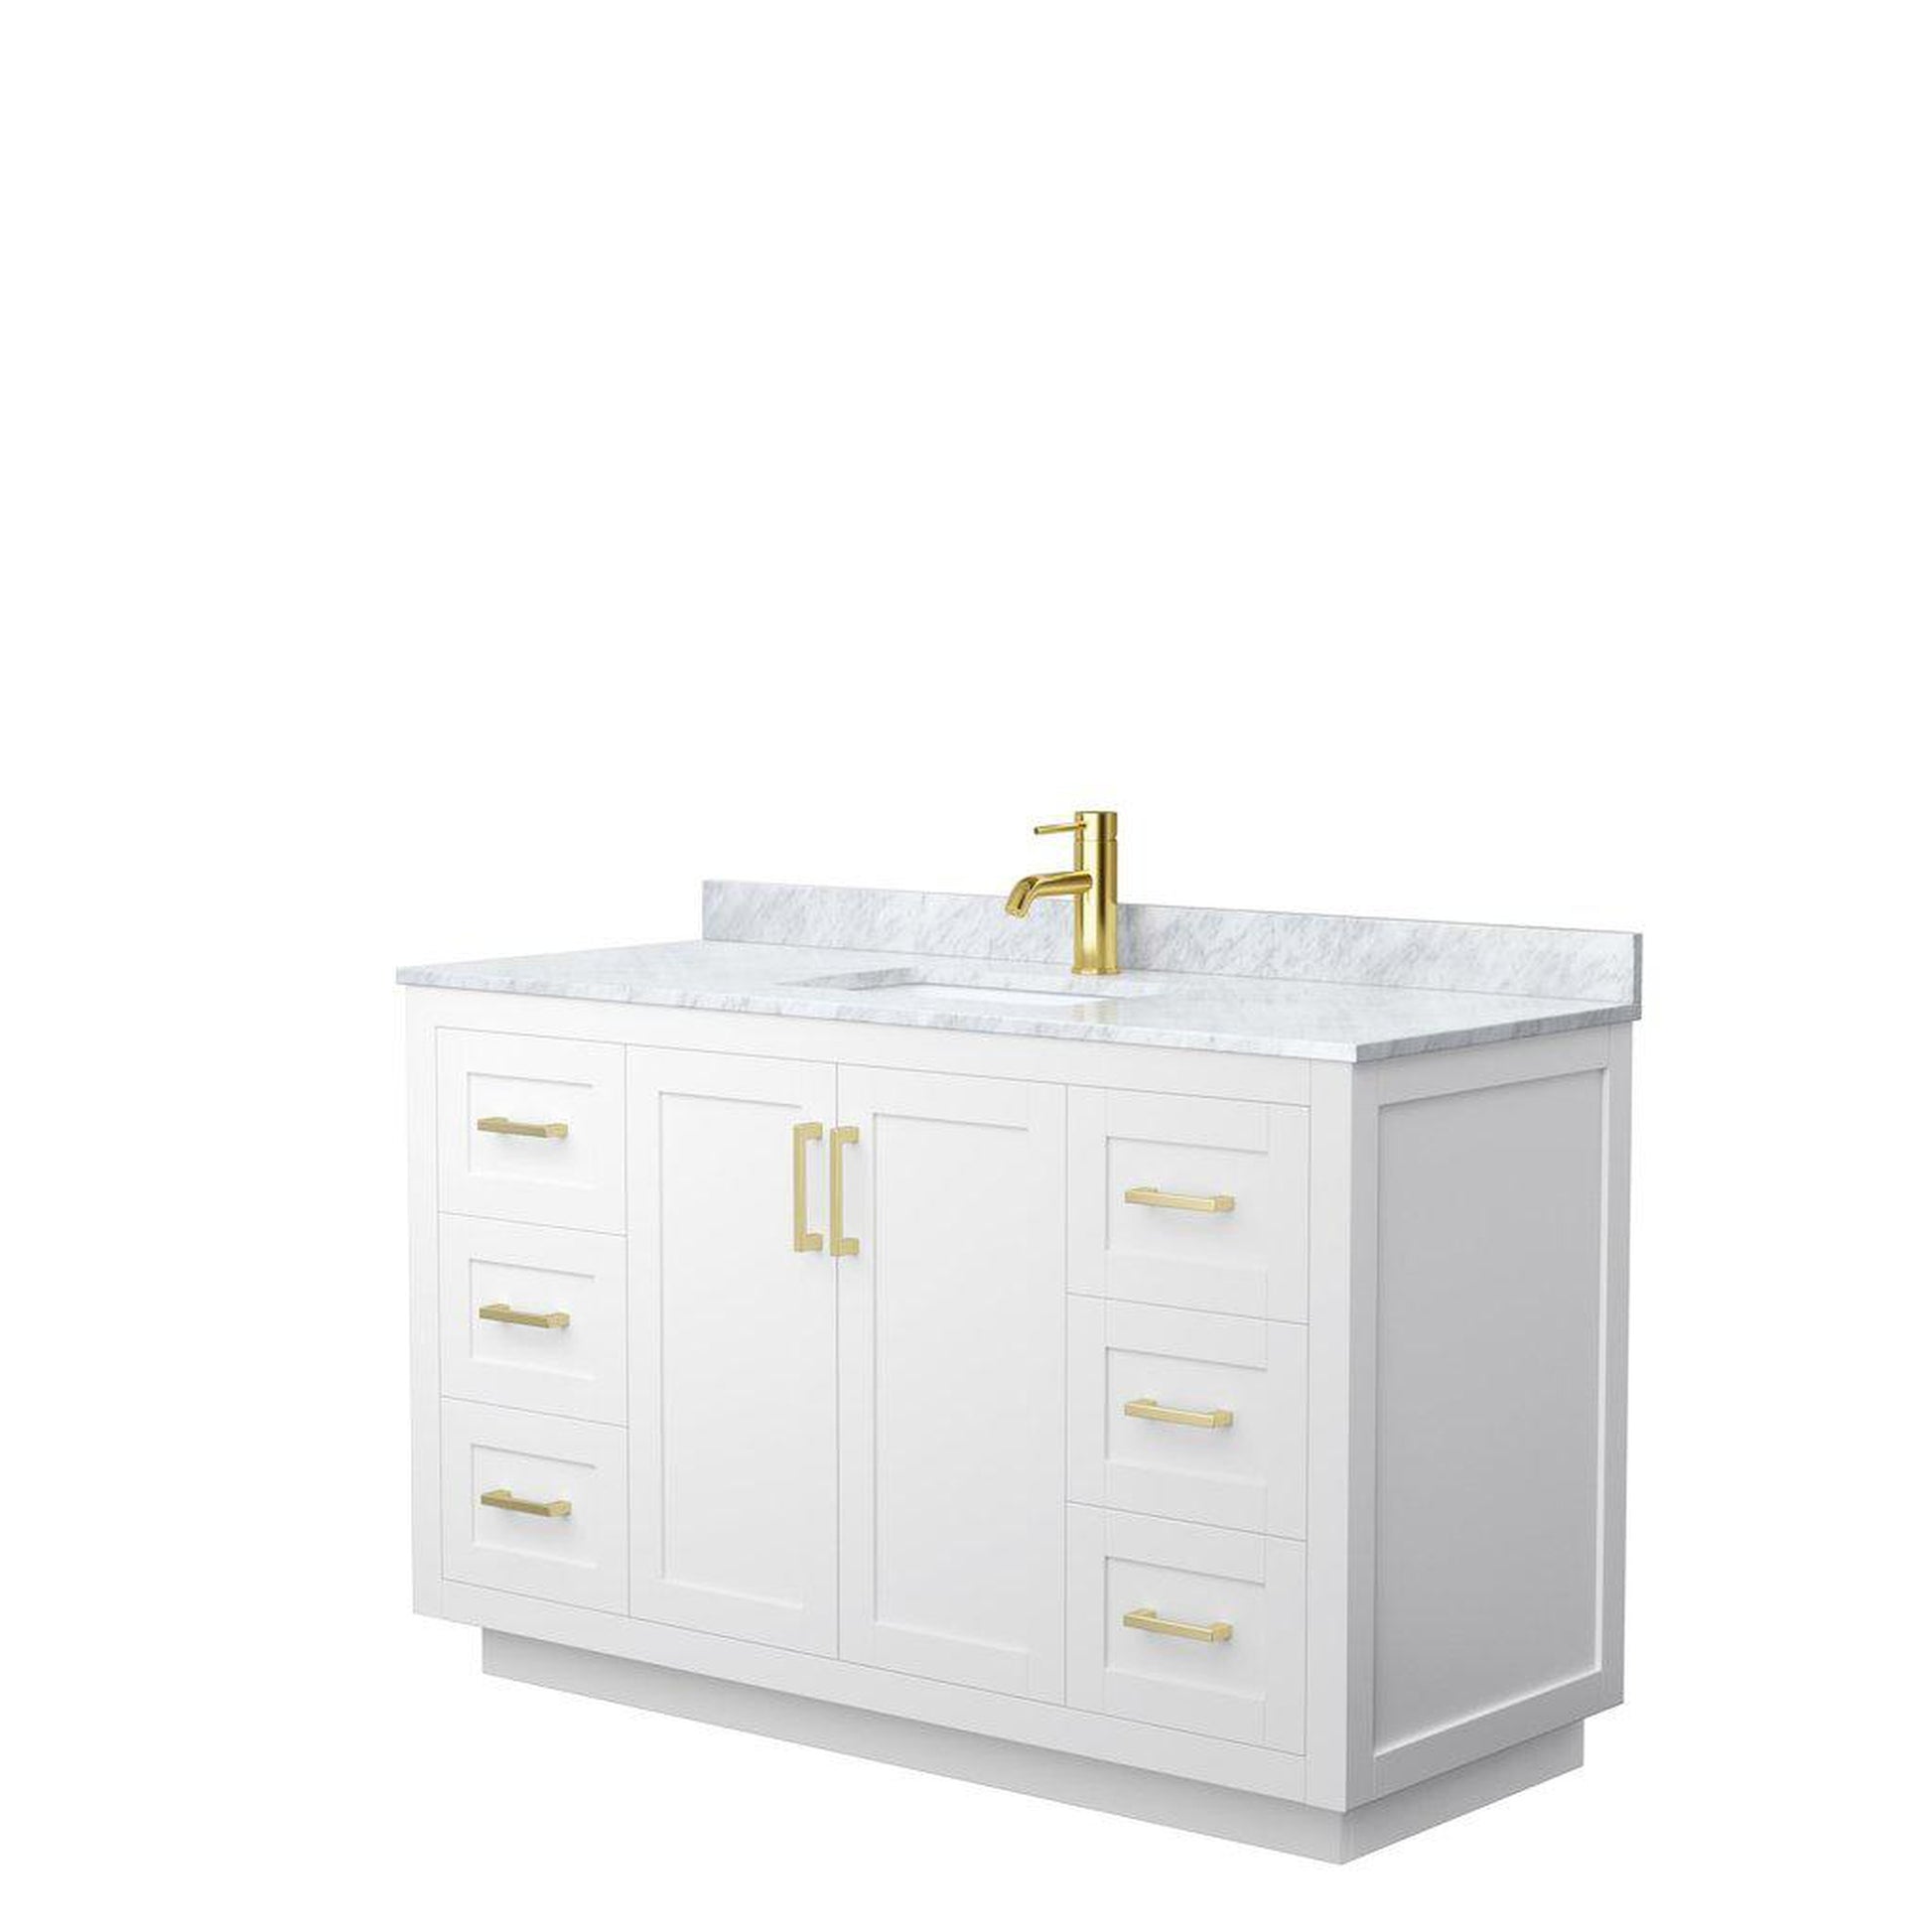 Wyndham Collection Miranda 54" Single Bathroom White Vanity Set With White Carrara Marble Countertop, Undermount Square Sink, And Brushed Gold Trim